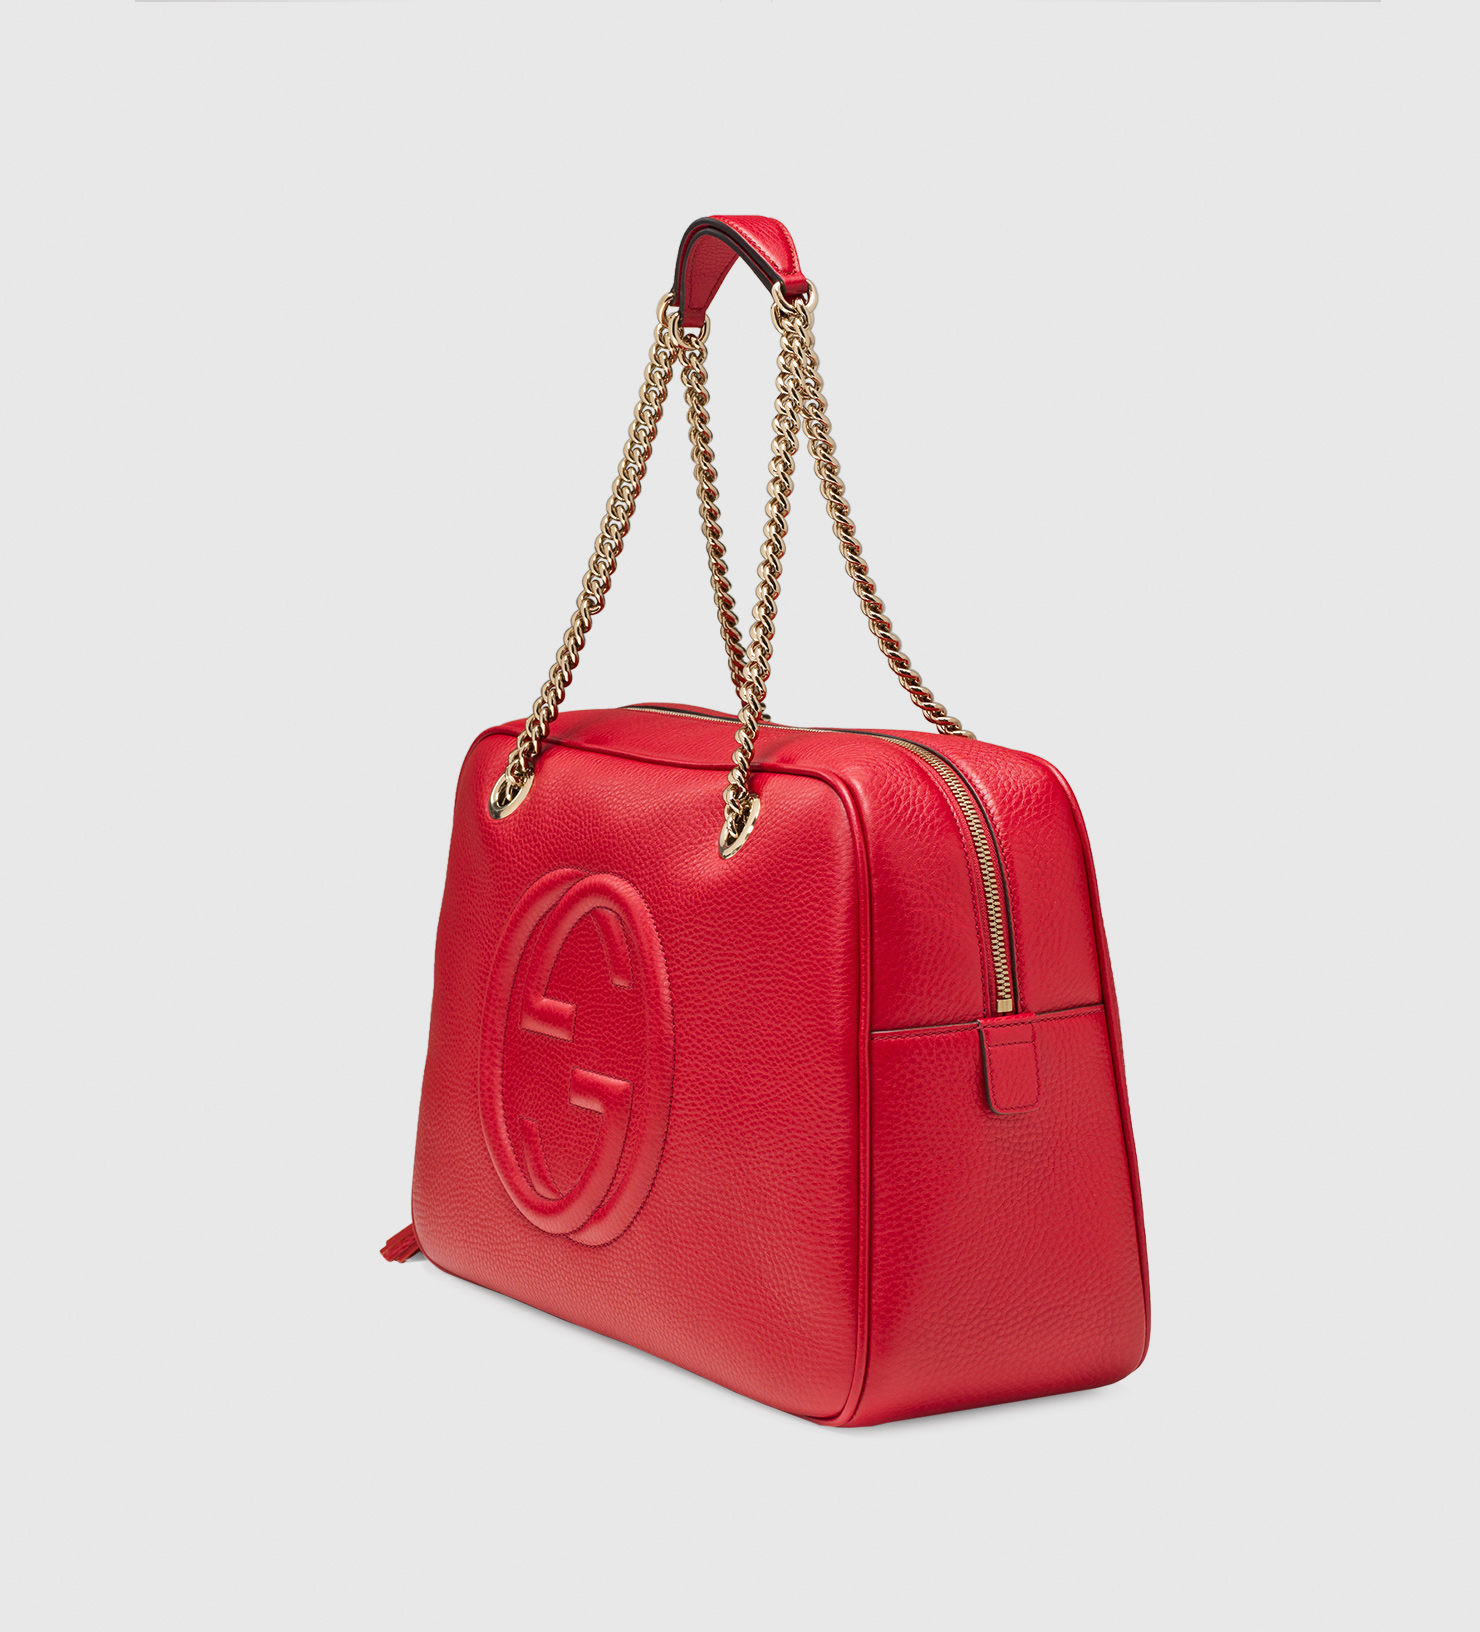 Lyst - Gucci Soho Leather Chain Shoulder Bag in Red